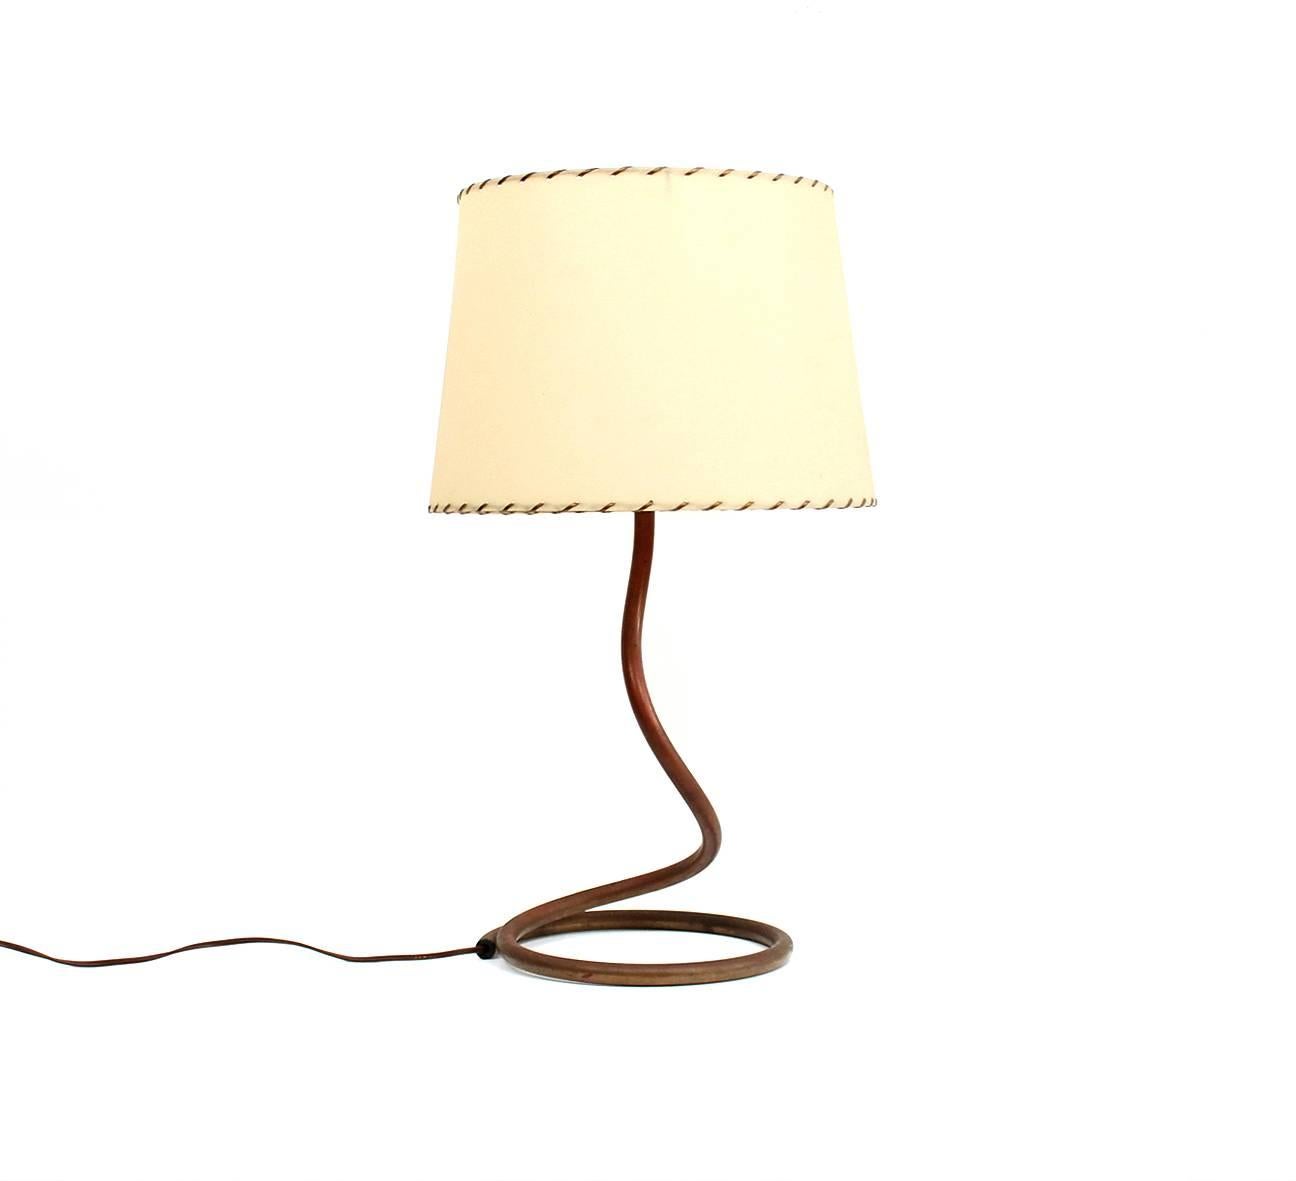 American Early Modernist Copper Coil Table Lamp Attributed to Kurt Versen